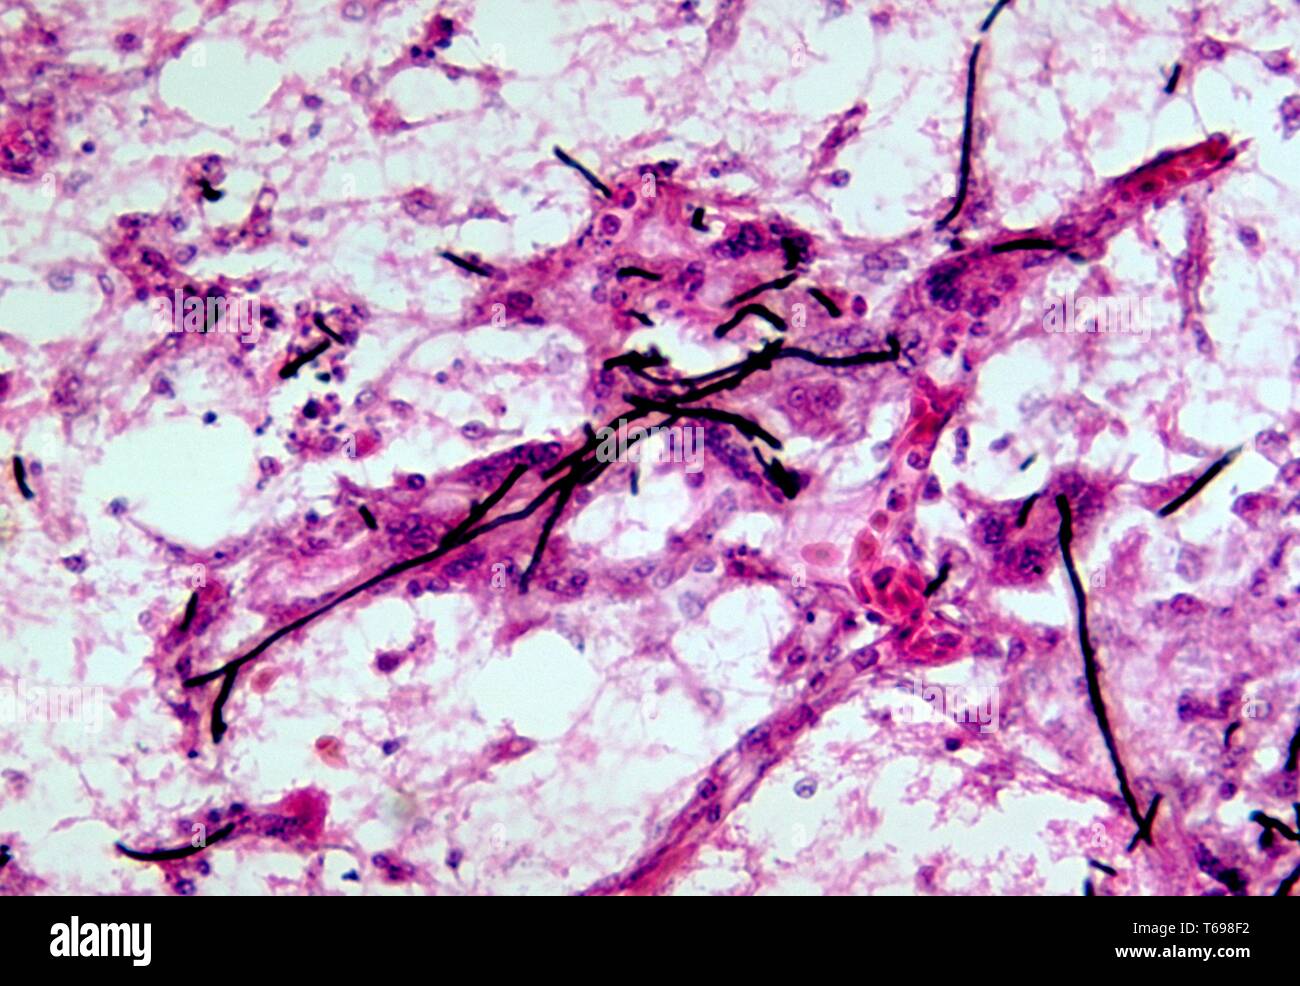 Photomicrograph of the phaeohyphomycosis associated histopathologic changes in 2 weeks old chick brain tissue caused by the Ochroconis gallopavum fungus, 1972. Image courtesy Centers for Disease Control and Prevention (CDC) / Dr Lucille K. Georg. () Stock Photo